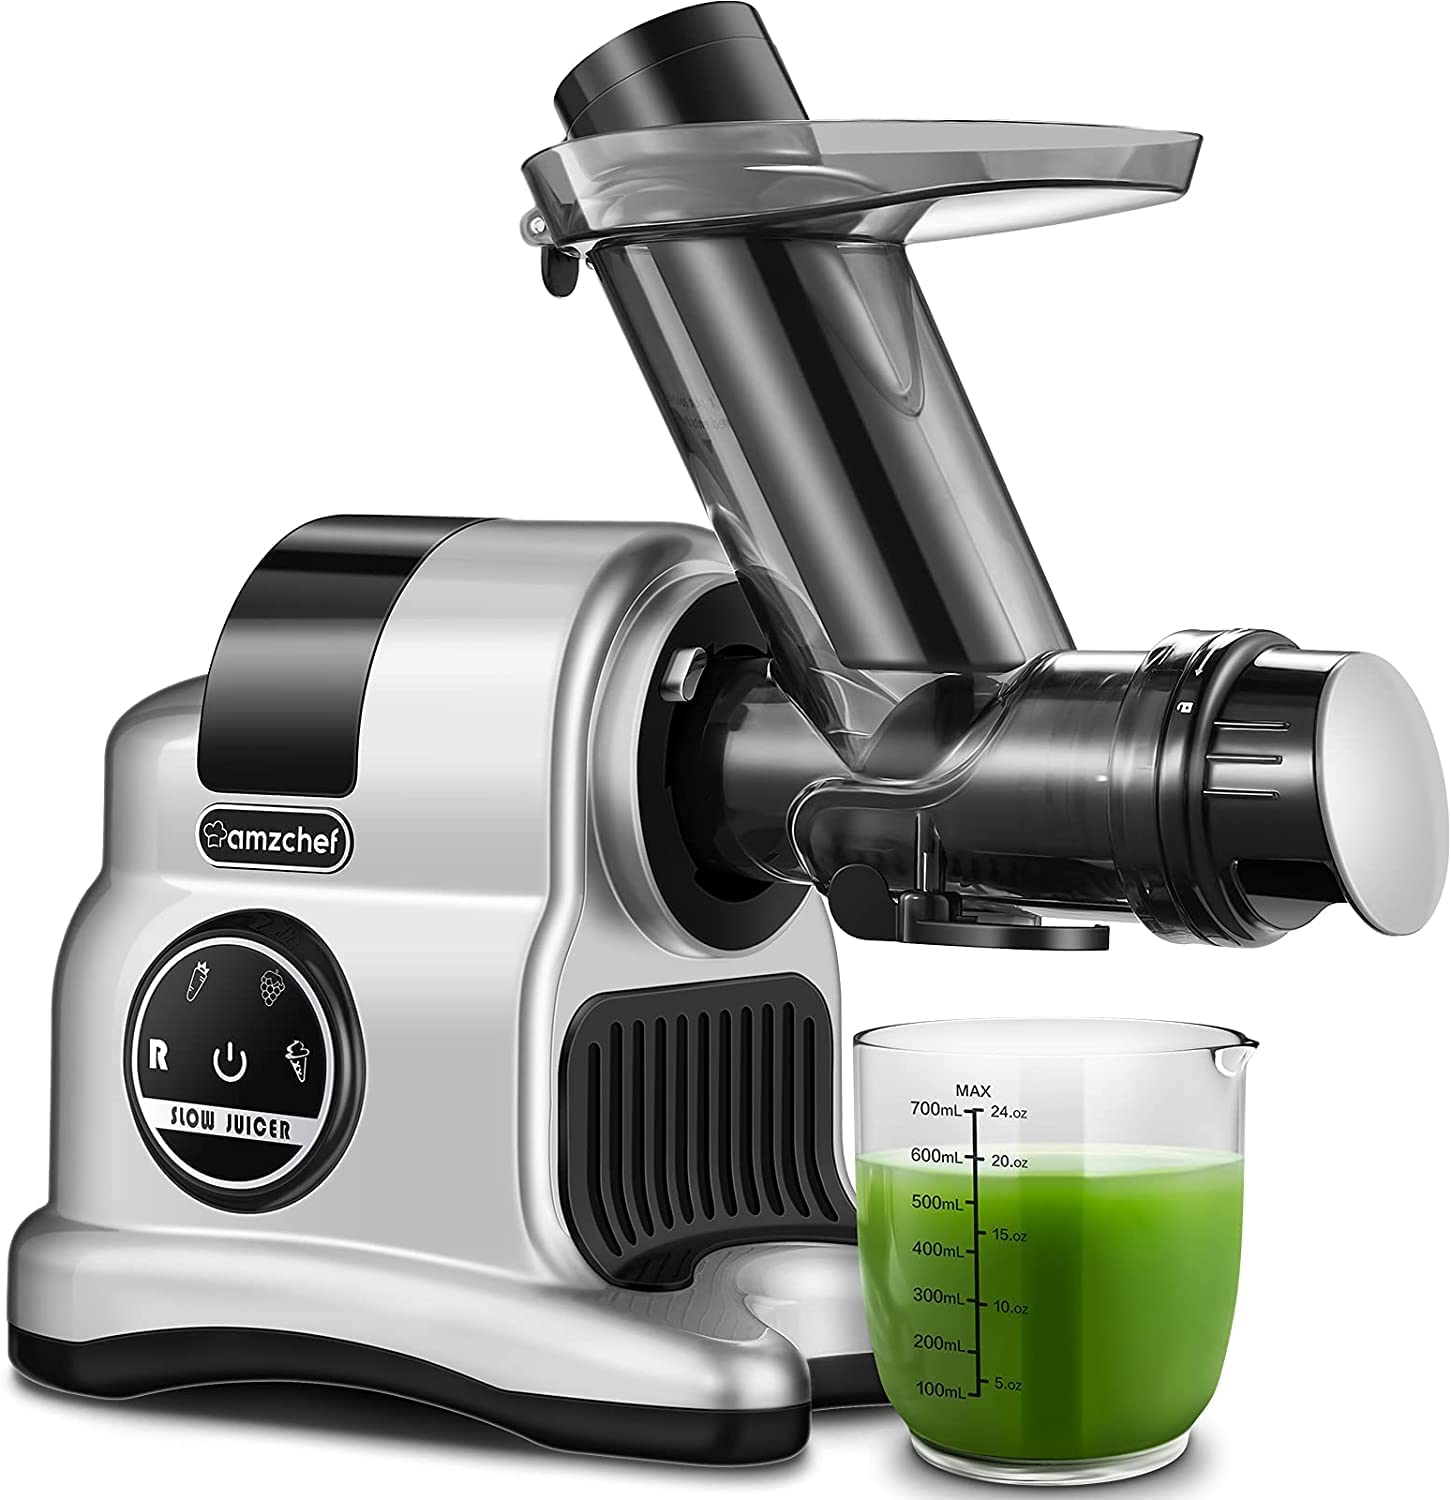 AMZCHEF Cold Press Slow Juicer ZM1501 Pure White